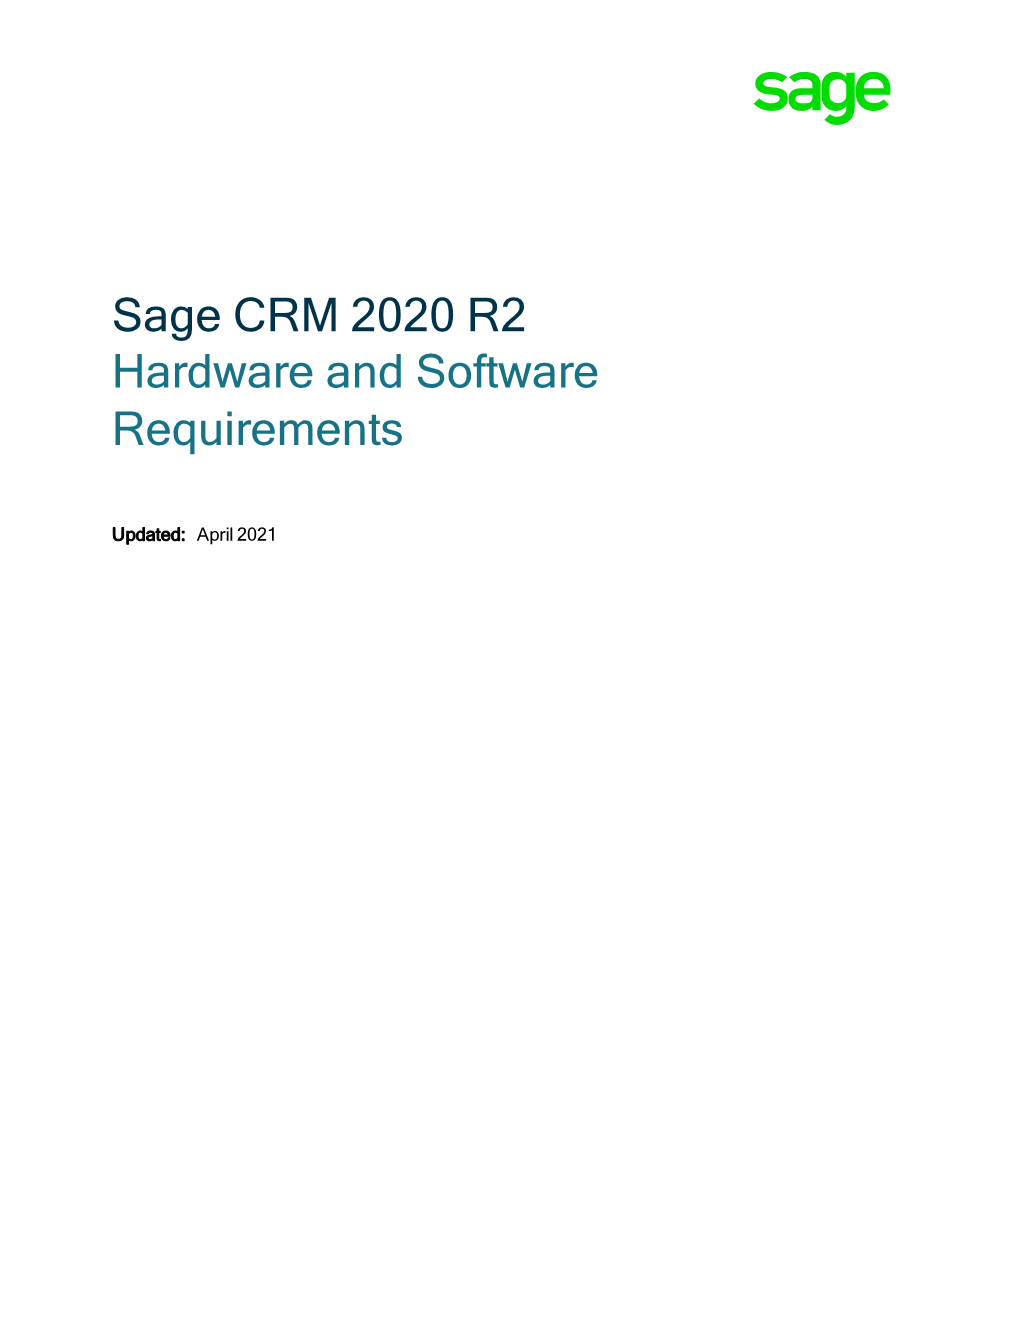 Sage CRM 2020 R2 Hardware and Software Requirements